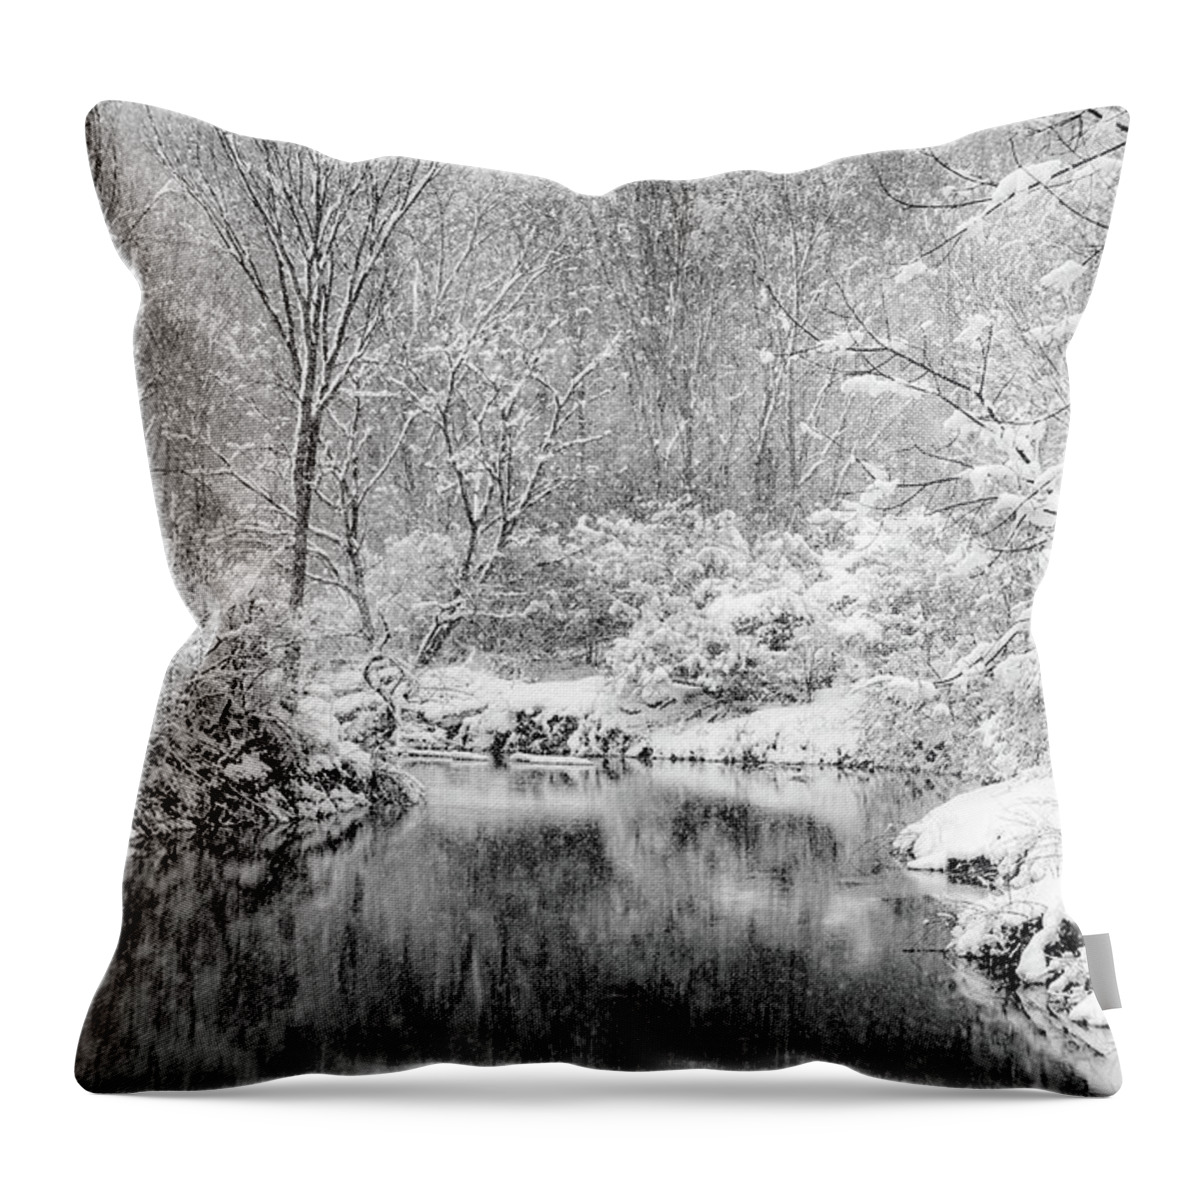  Throw Pillow featuring the photograph A Perfect Storm by Kendall McKernon